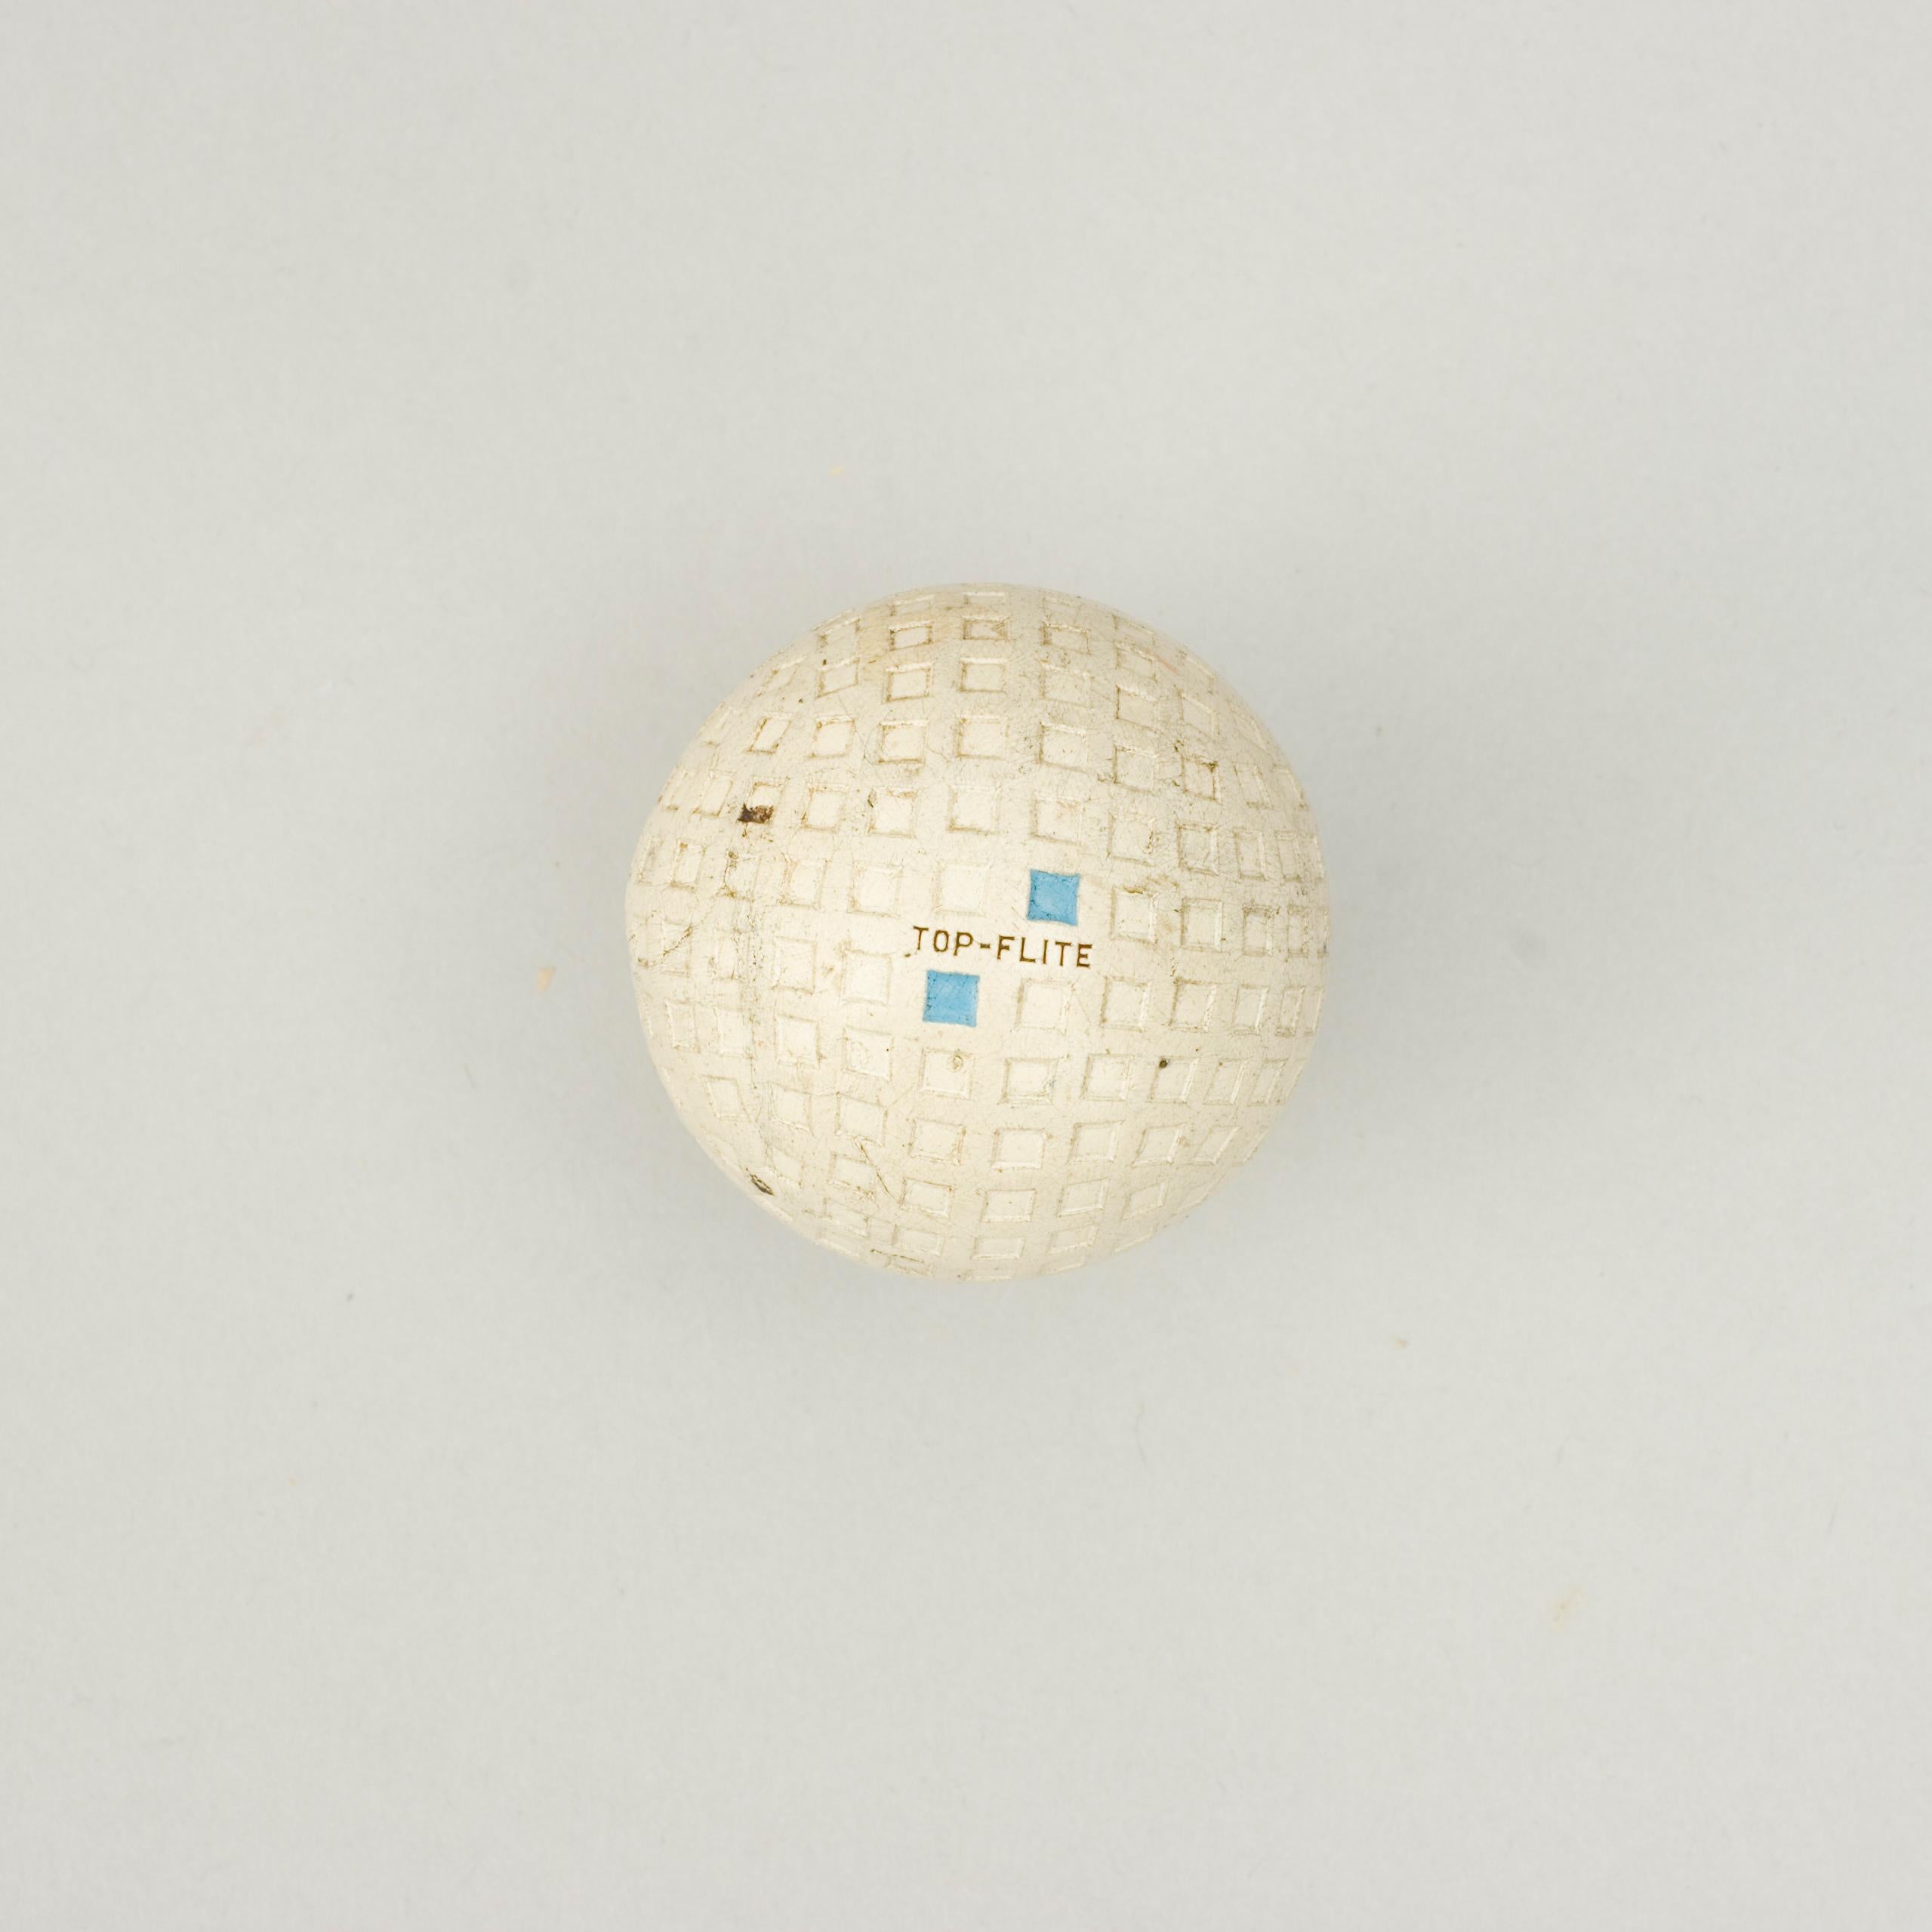 Vintage Spalding 'Top-Flite' Golf Ball.
A 1930's Spalding rubber core golf ball in very good condition. The ball has a square mesh or lattice pattern and is called 'Top-Flite'. The ball is marked 'Spalding' on one pole and 'Top-Flite' on the other